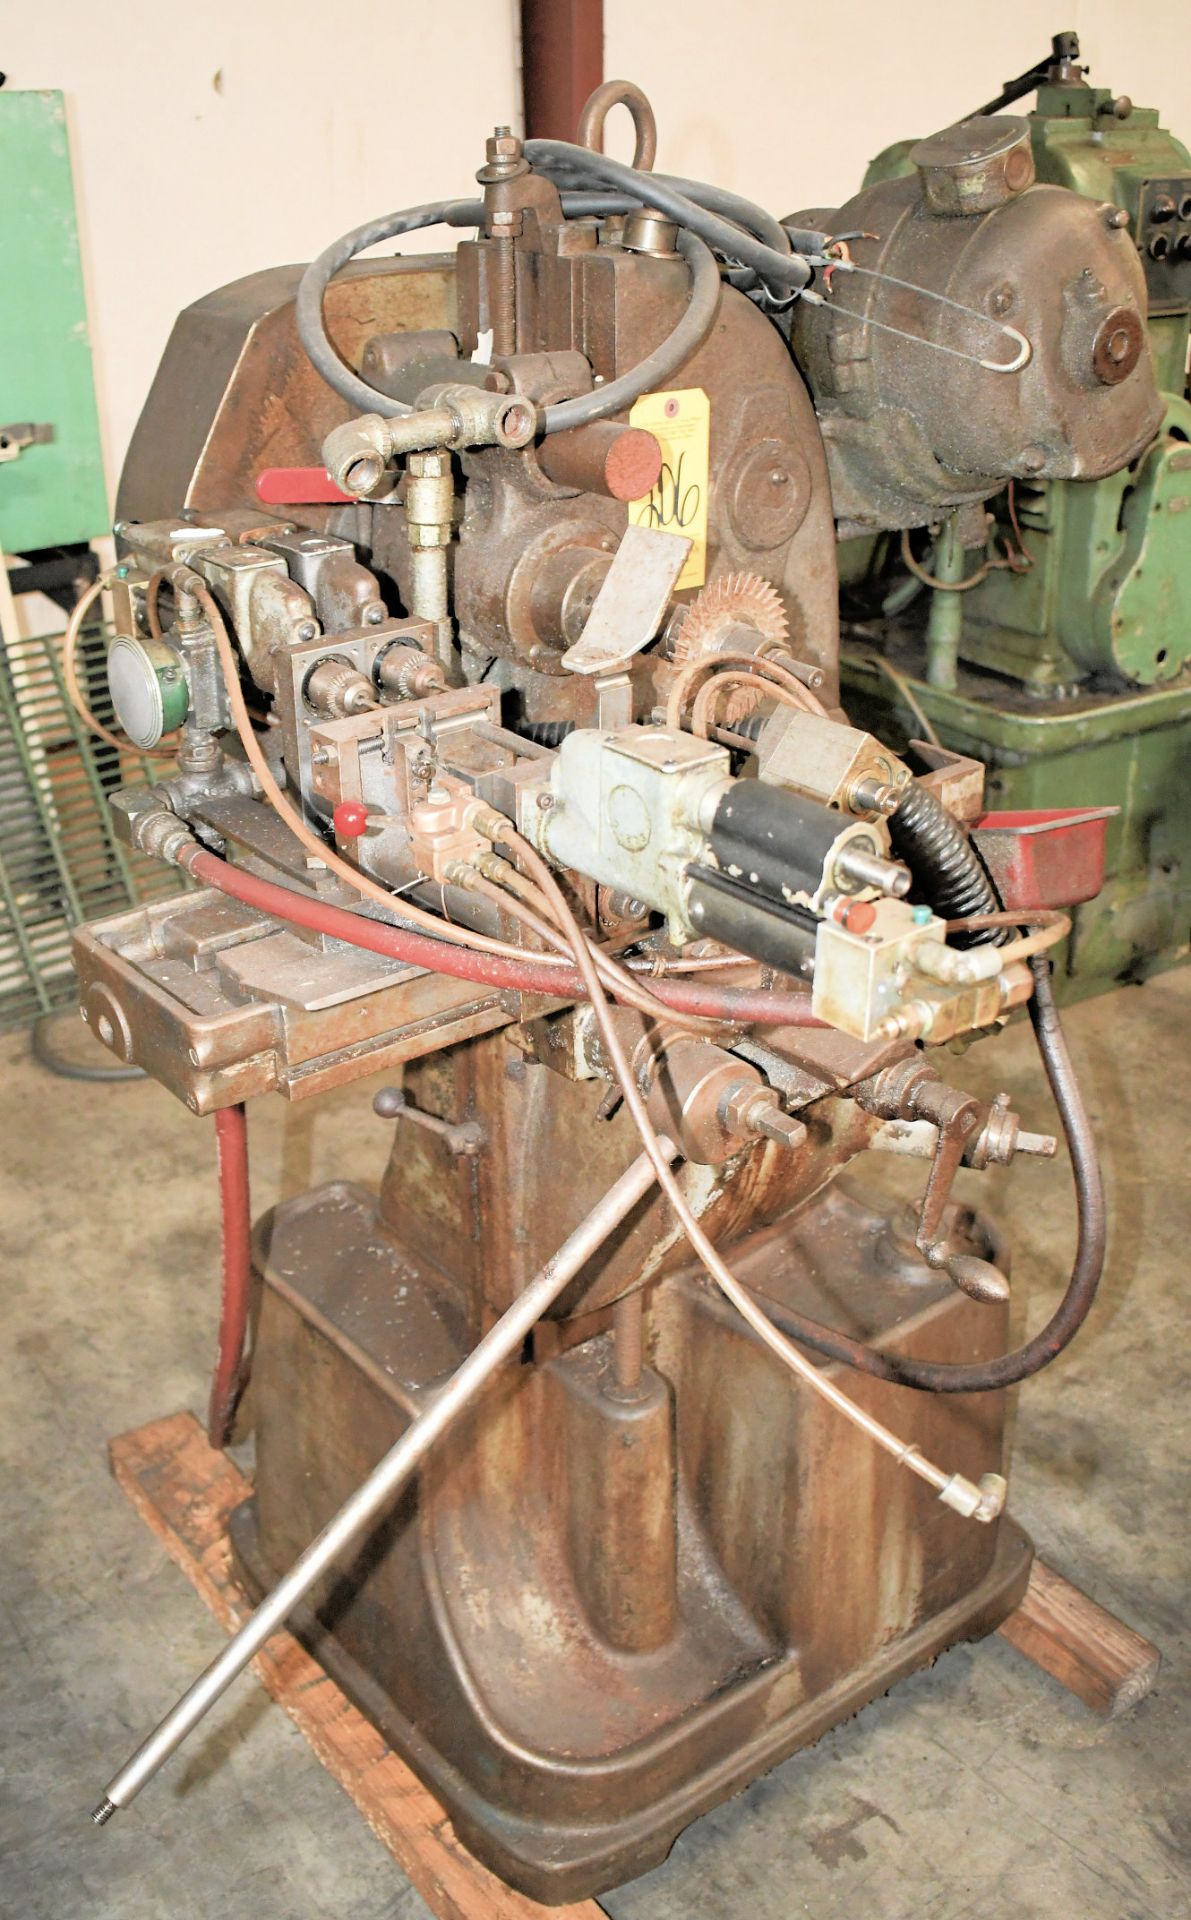 Waltham "Whiney" Horizontal Hand Miller Machine, S/n 4-E-182, 7" x 24" Table, 3-Spindle Horizontal - Image 2 of 3